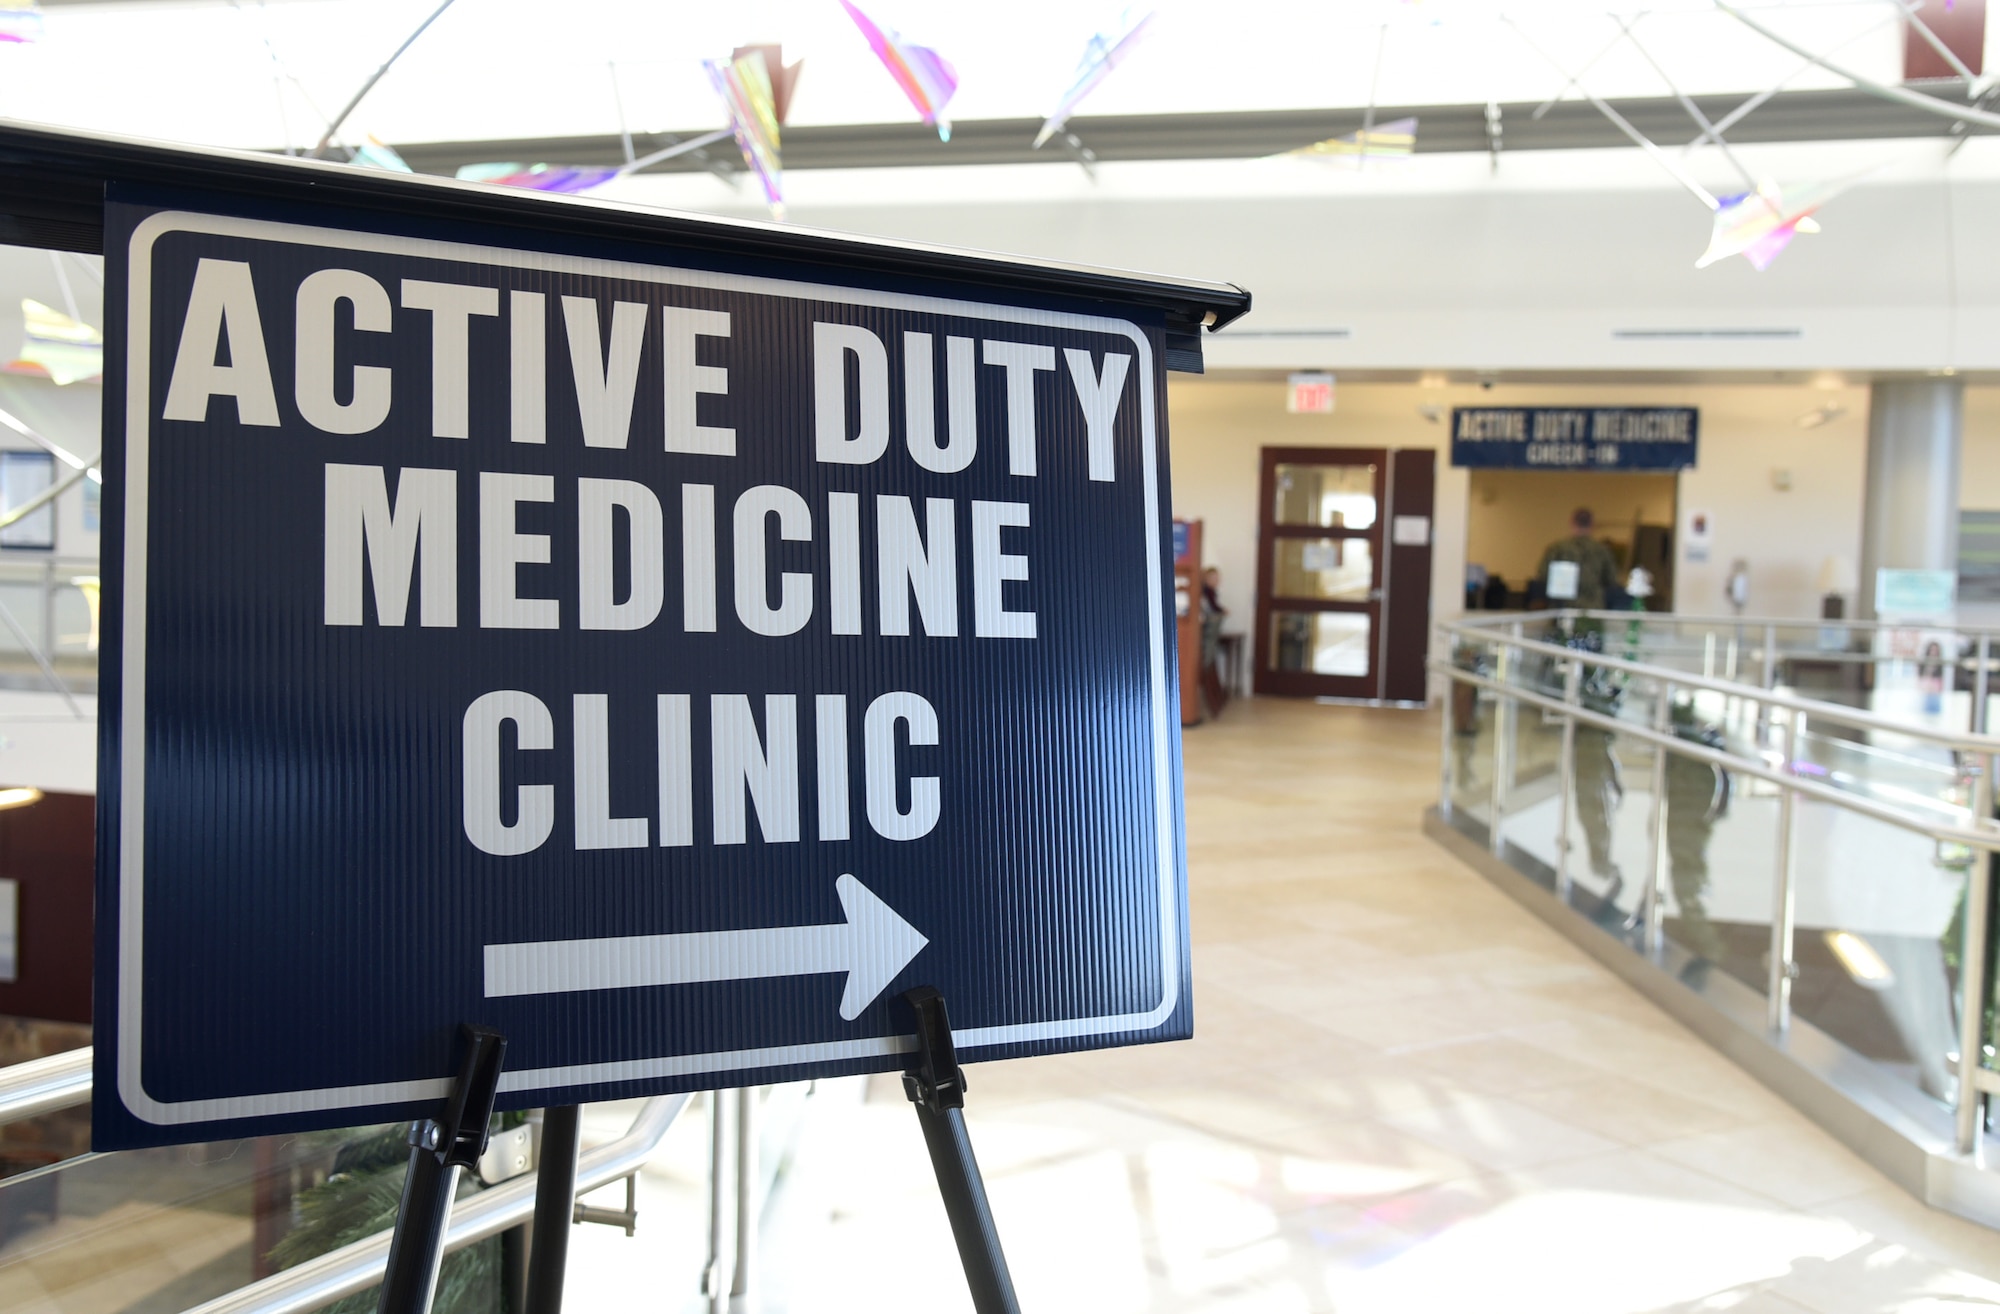 The 72nd Medical Group has transitioned active duty personnel to their new Active Duty Medicine Clinic to provide improved care. The clinic addresses Airman health needs by squadron, providing individualized and squadron-level health assessments. (U.S. Air Force photo/Kelly White)